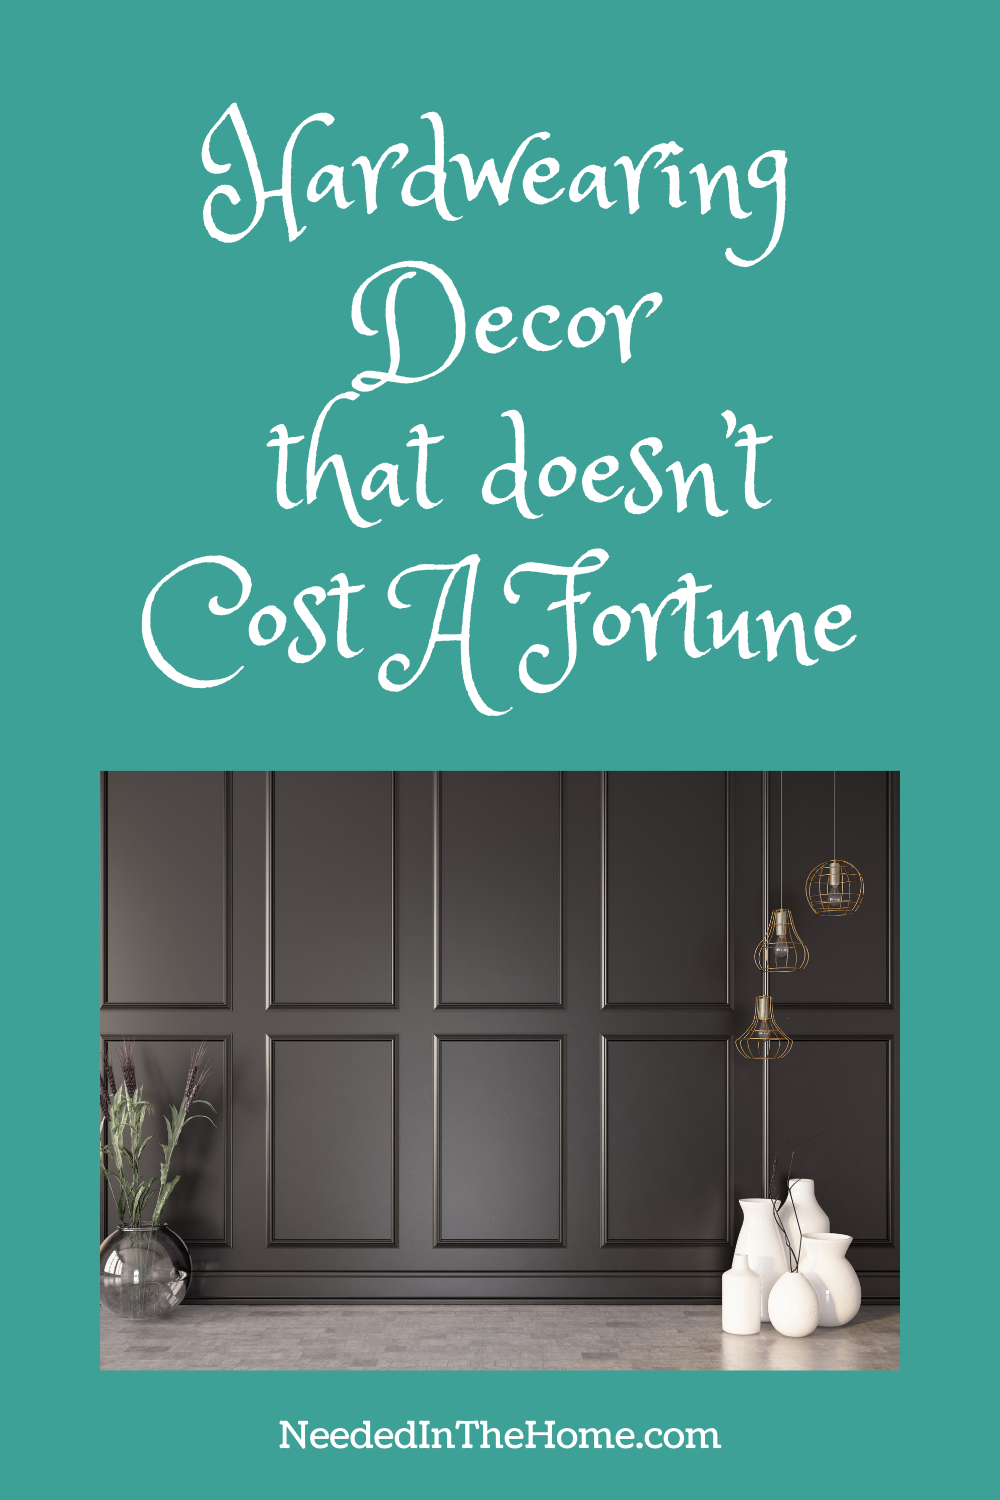 pinterest-pin-description hardwearing decor that doesn't cost a fortune dark wall panels vases lighting neededinthehome